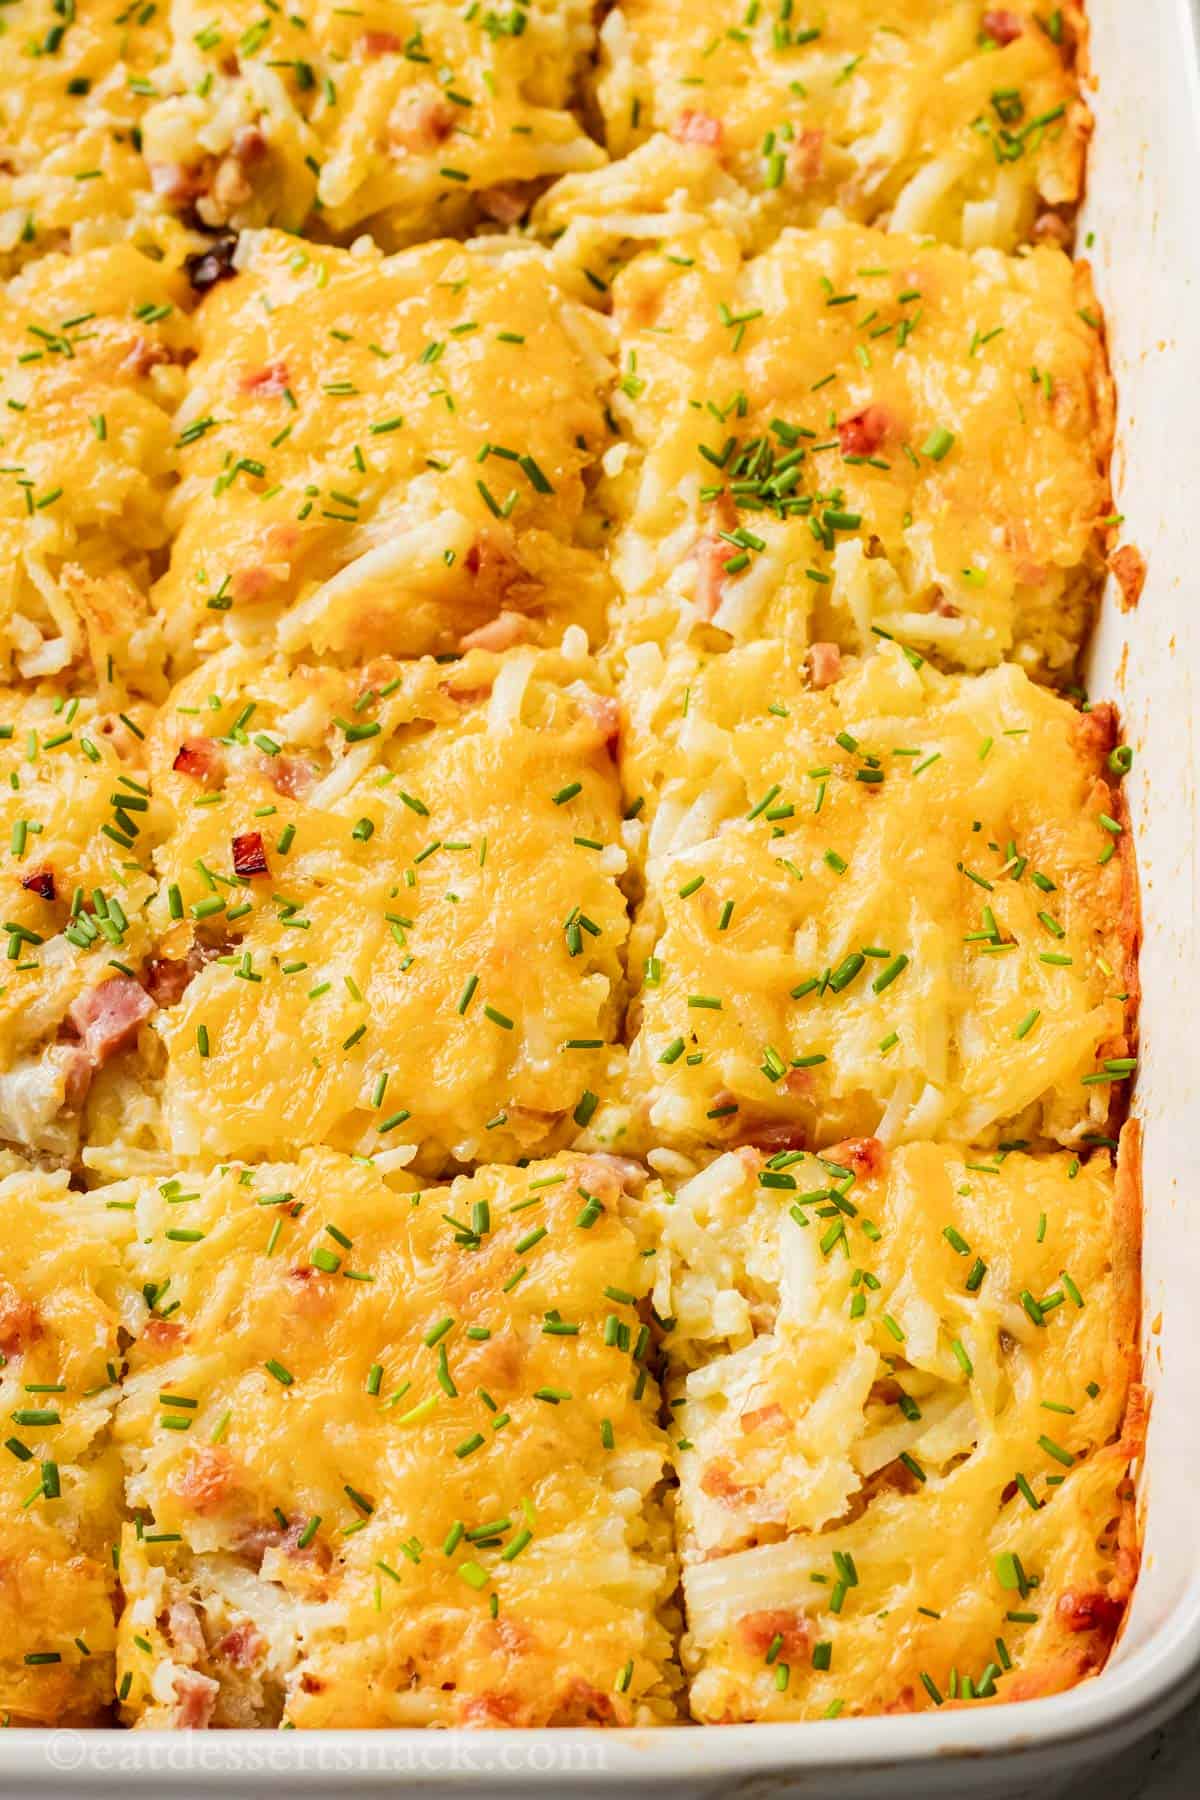 Sliced and baked ham and cheese casserole in white baking dish.